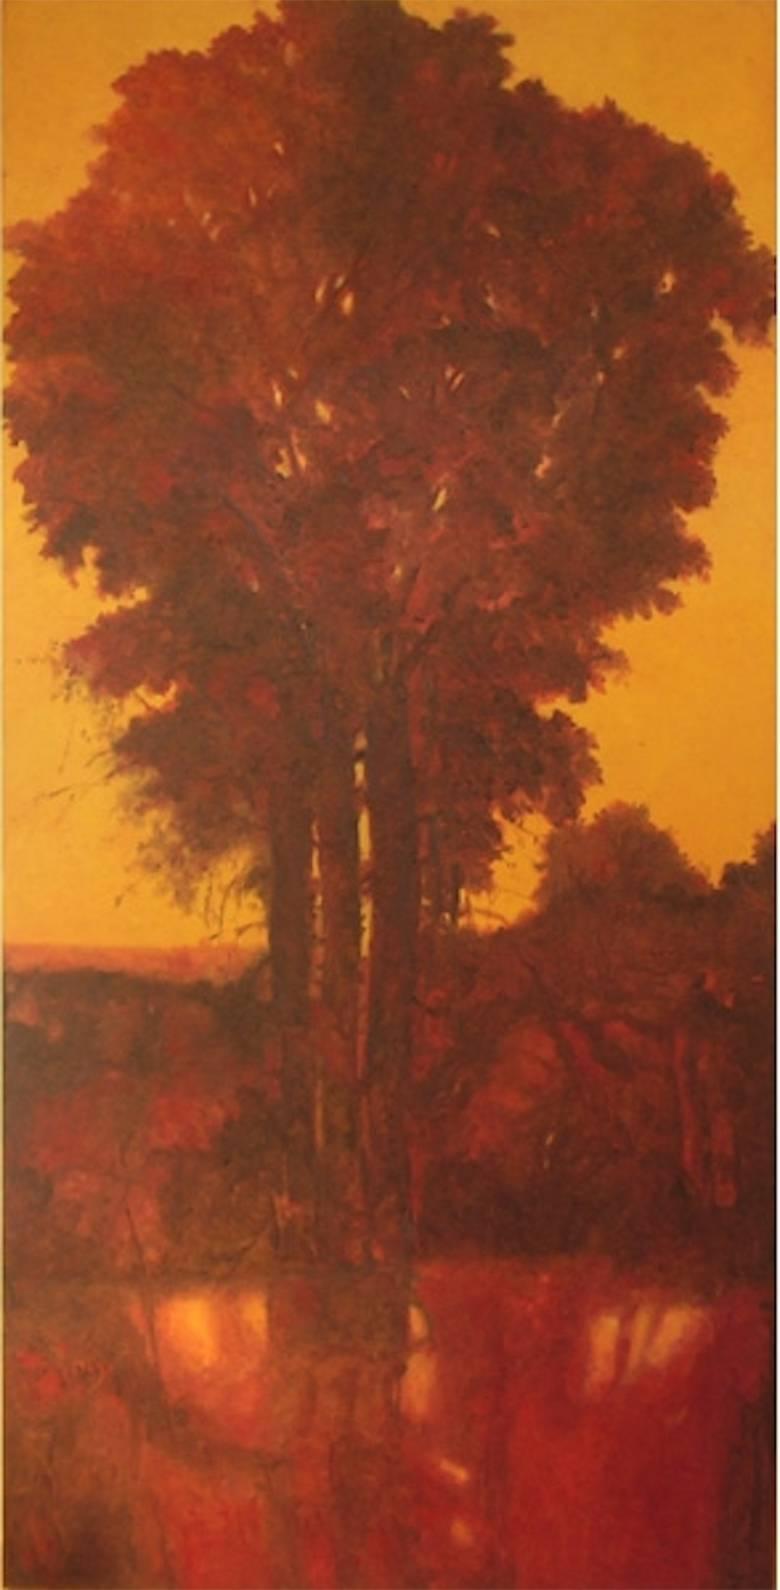 Umbra Mai Fu (Vertical, Monochromatic Red Landscape Oil Painting on Canvas)